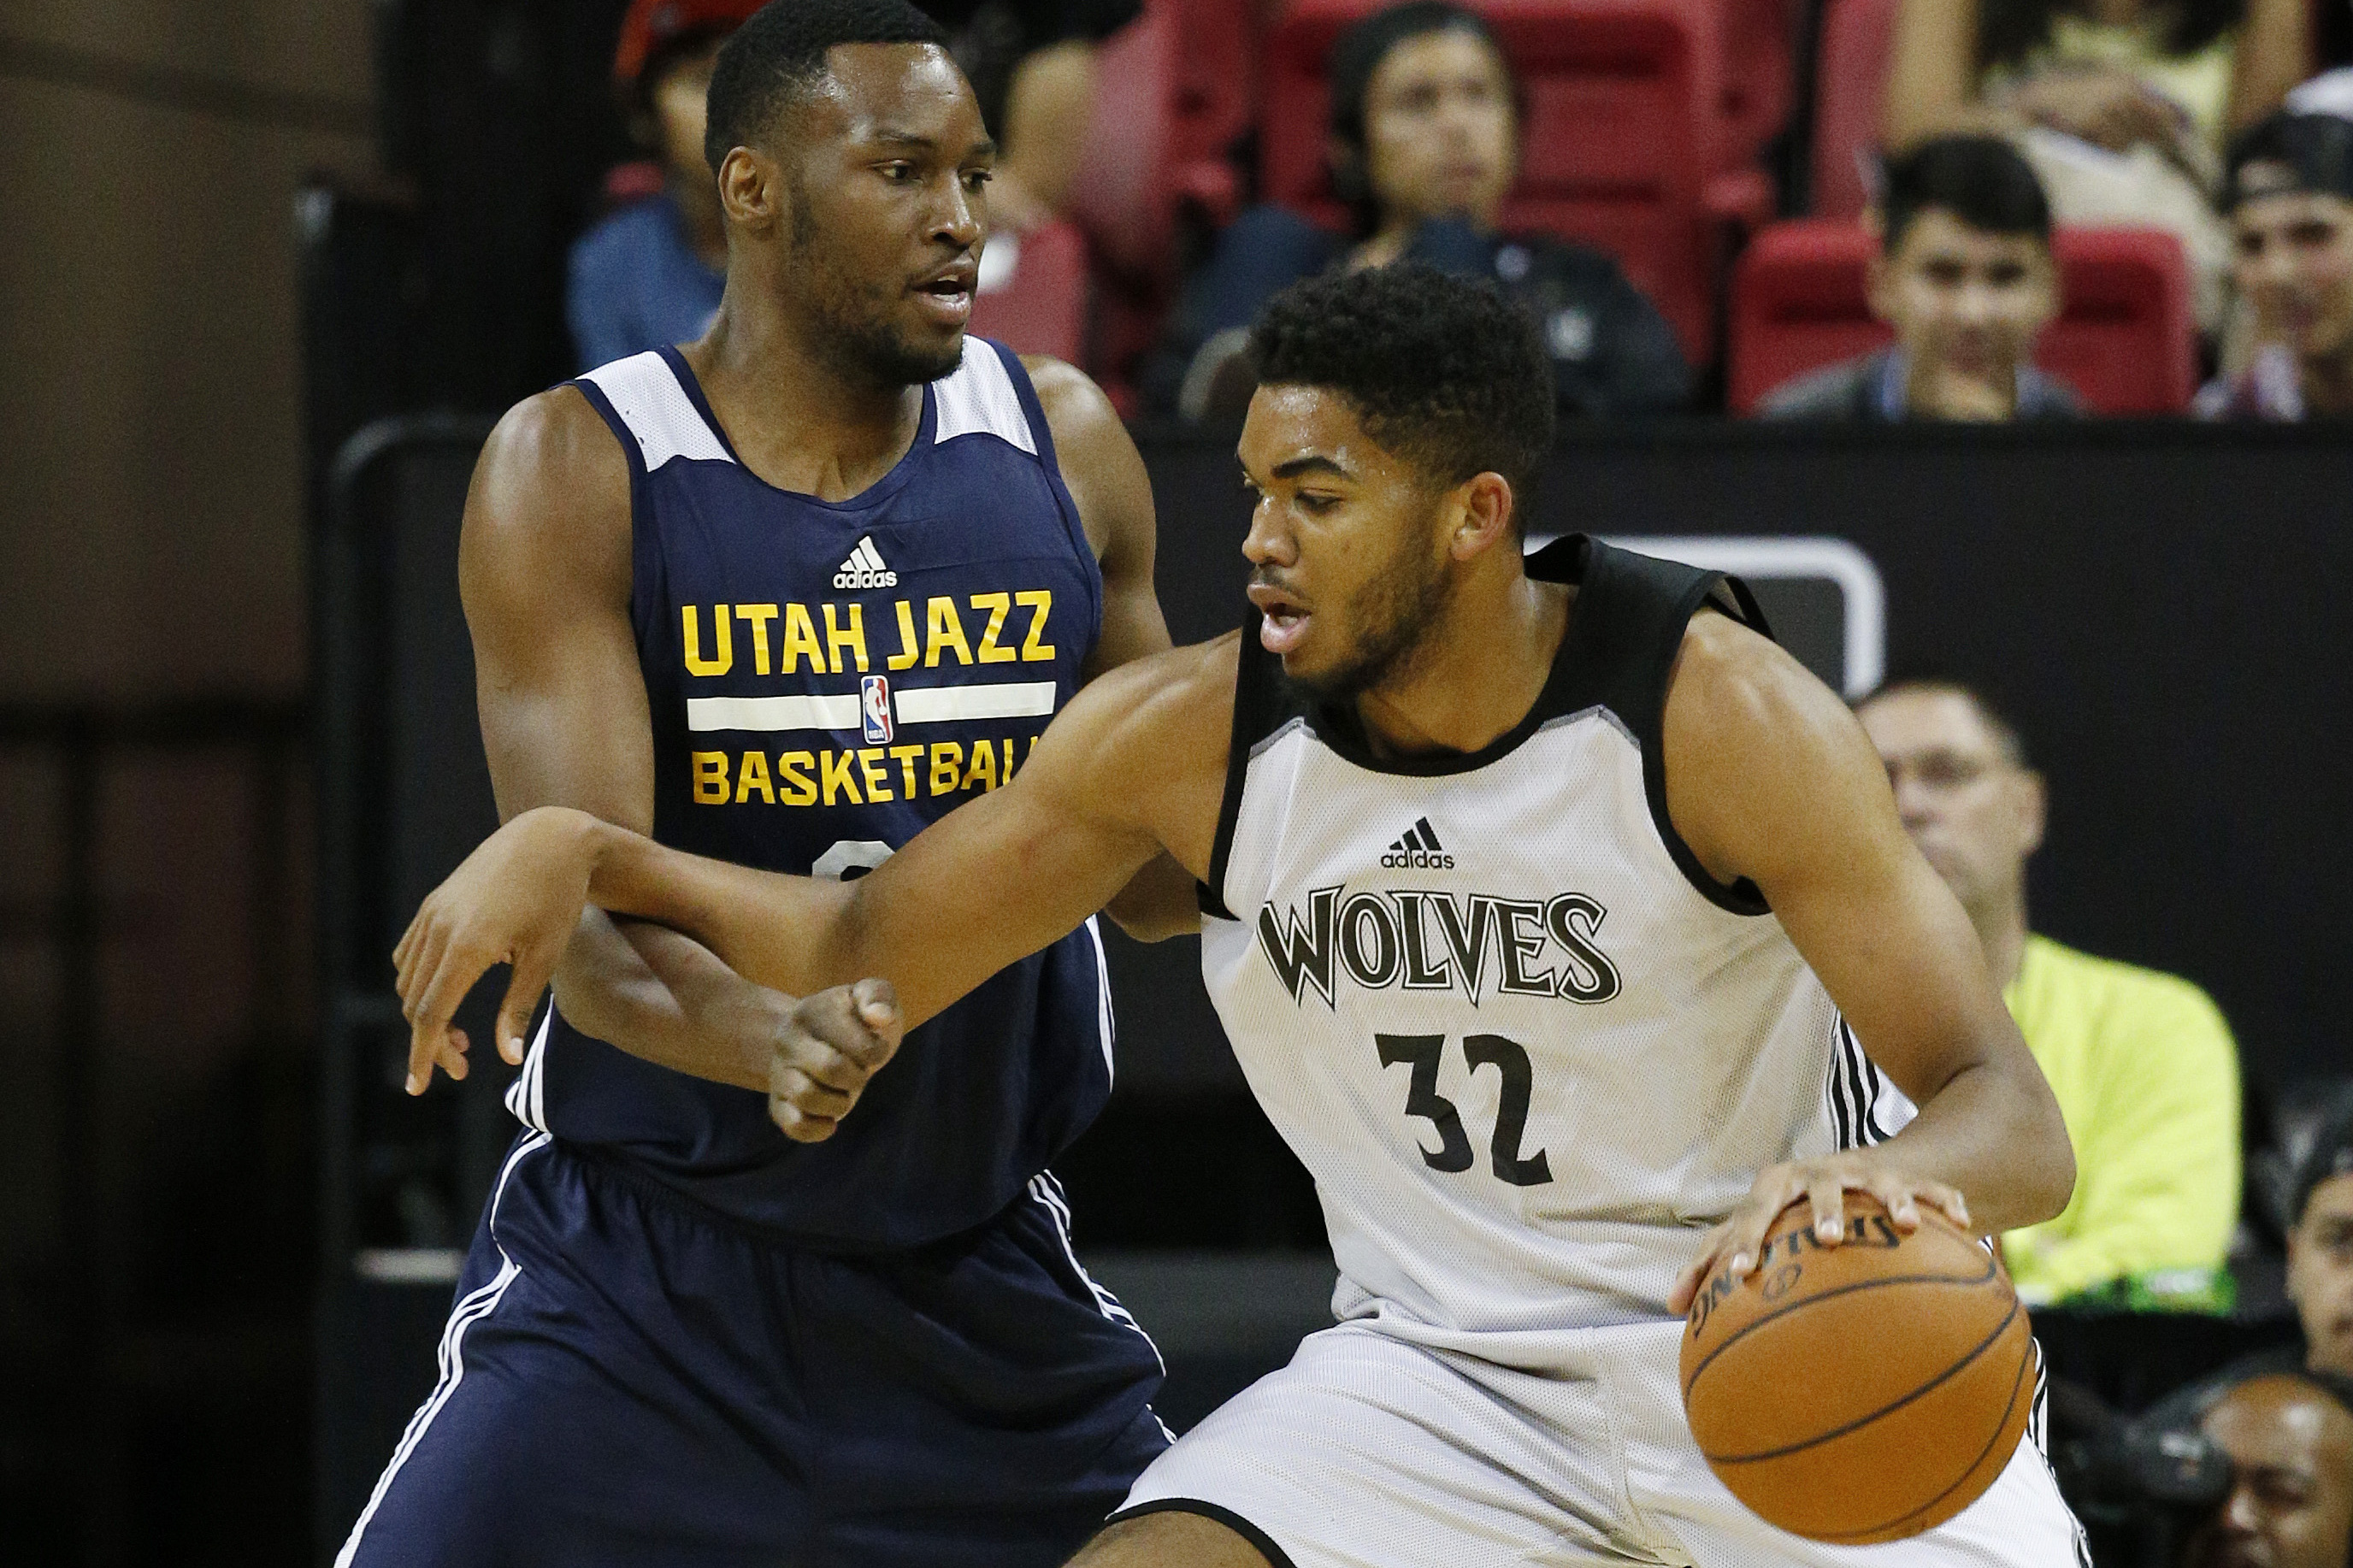 Timberwolves : Karl-Anthony Towns still gets bothered by physicality